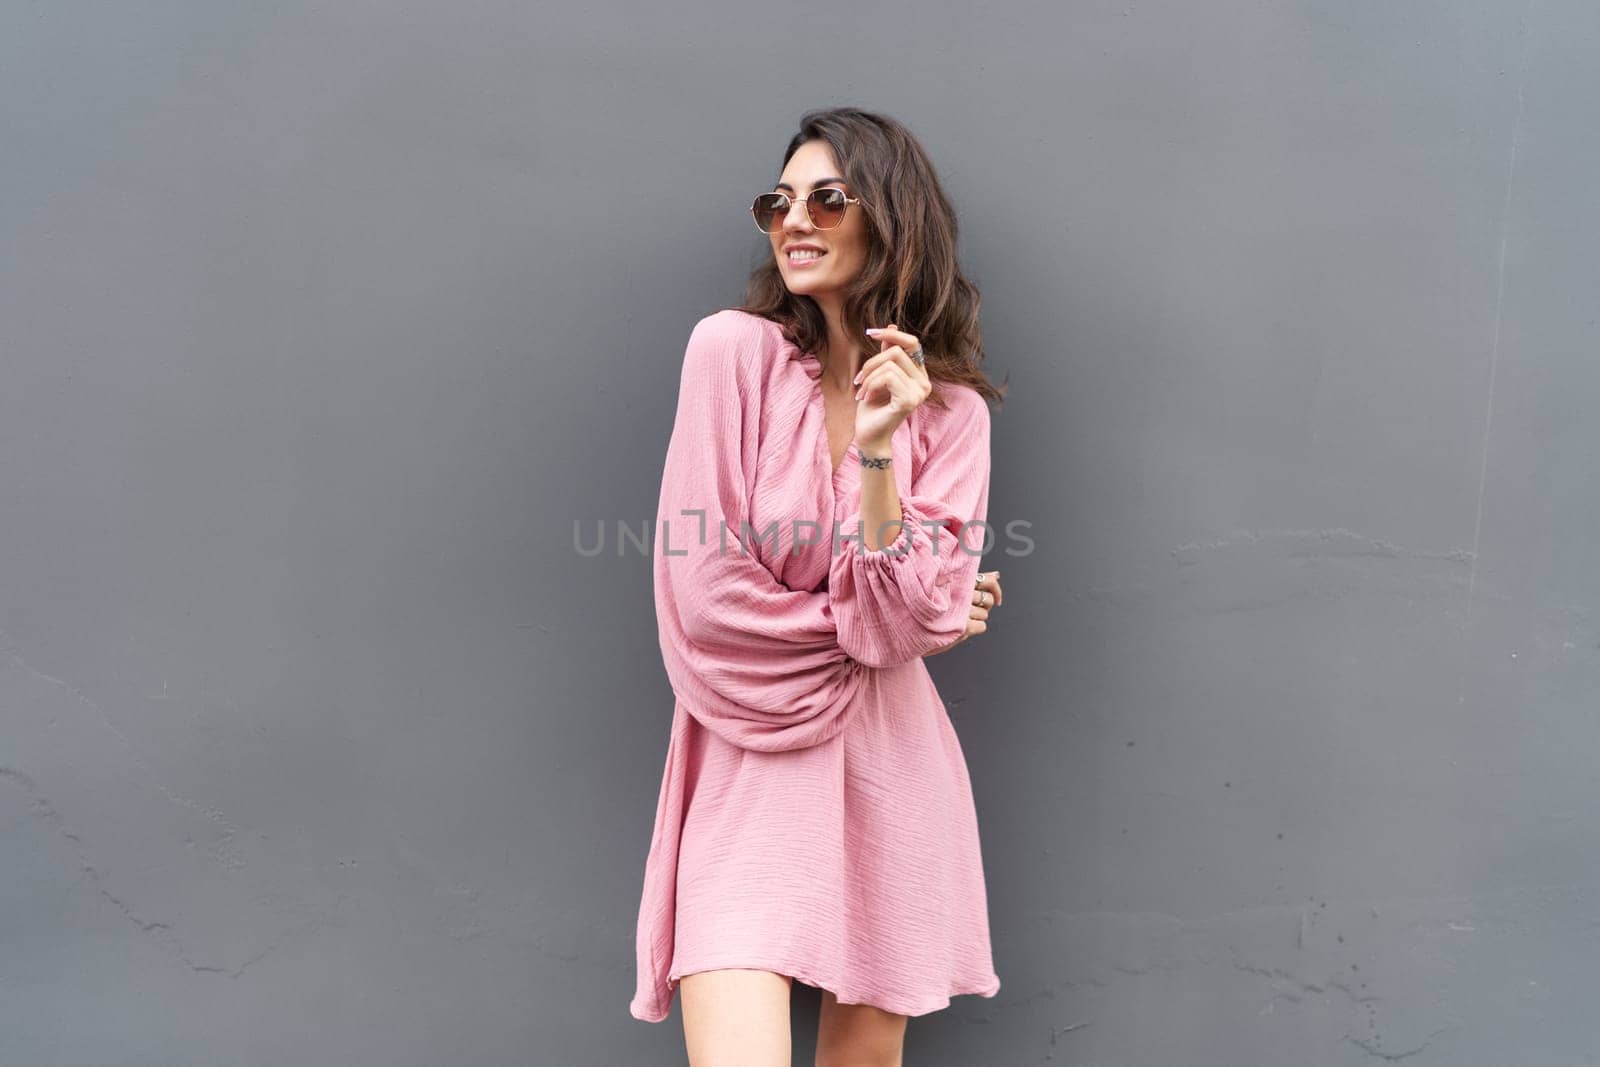 Young beautiful smiling cute romantic woman in trendy summer dress. Carefree woman posing in the street near grey wall. Positive model outdoors in sunglasses. Cheerful and happy.